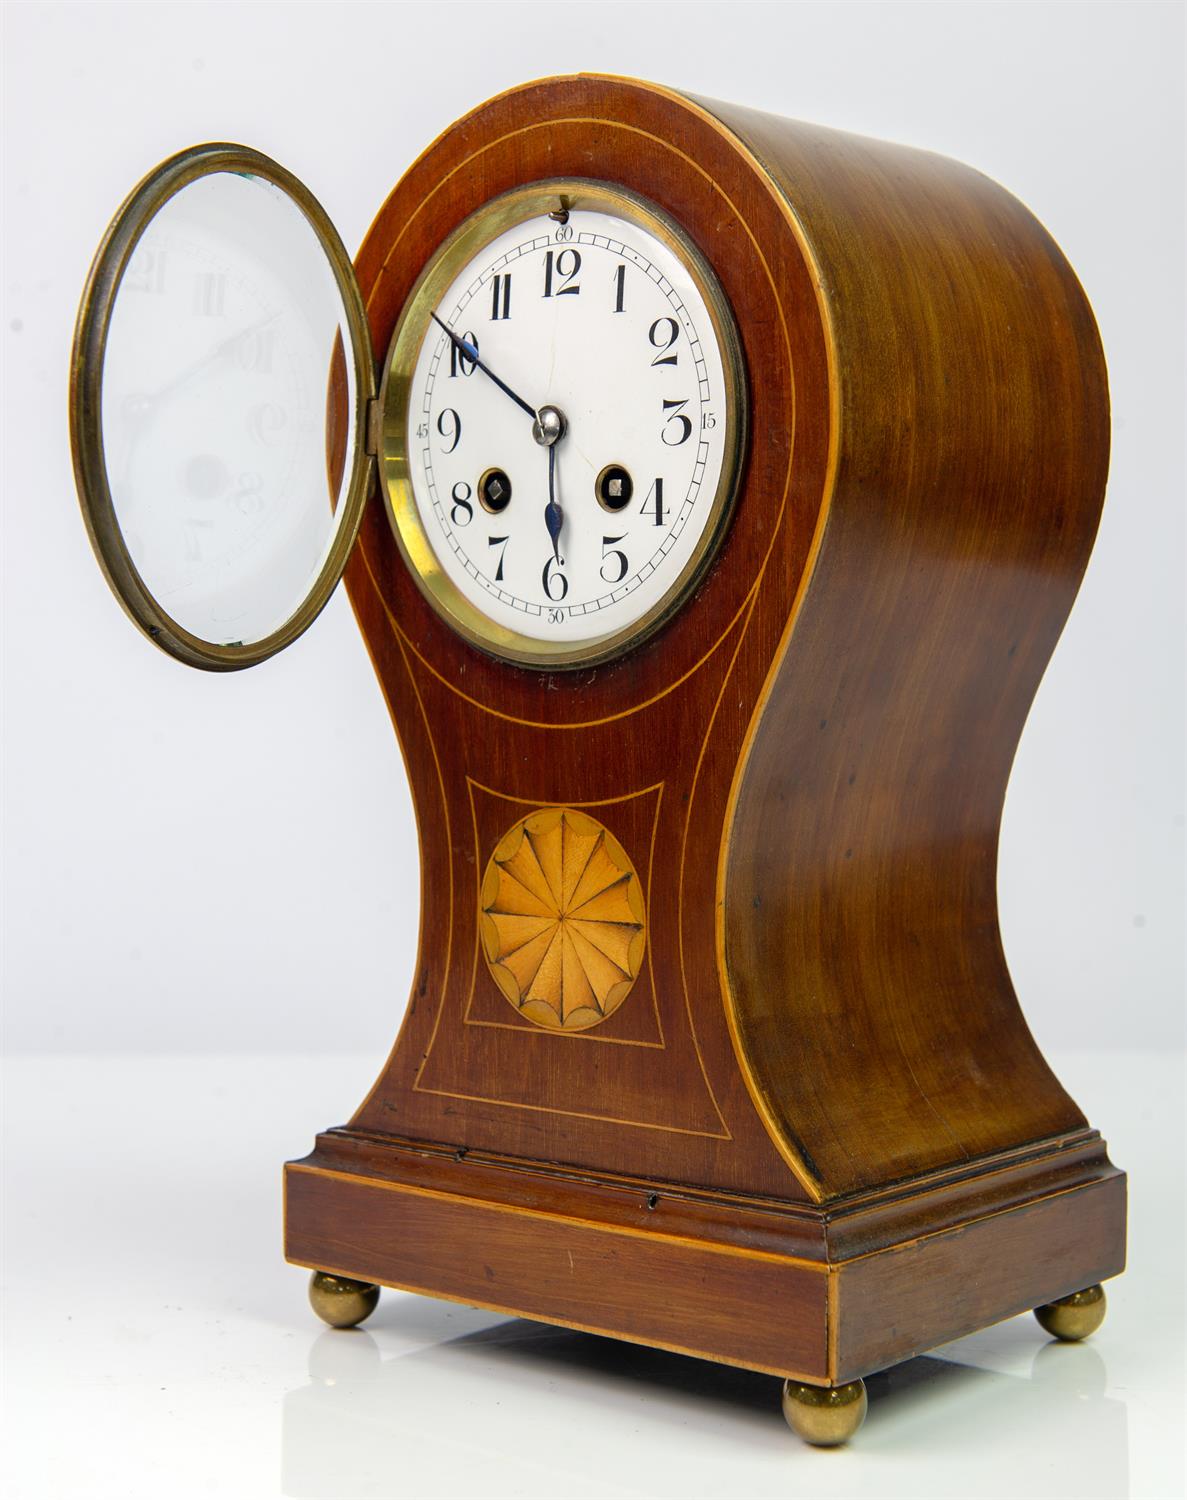 Edwardian mahogany balloon clock the two train French movement by Couillet Freres, - Image 12 of 28